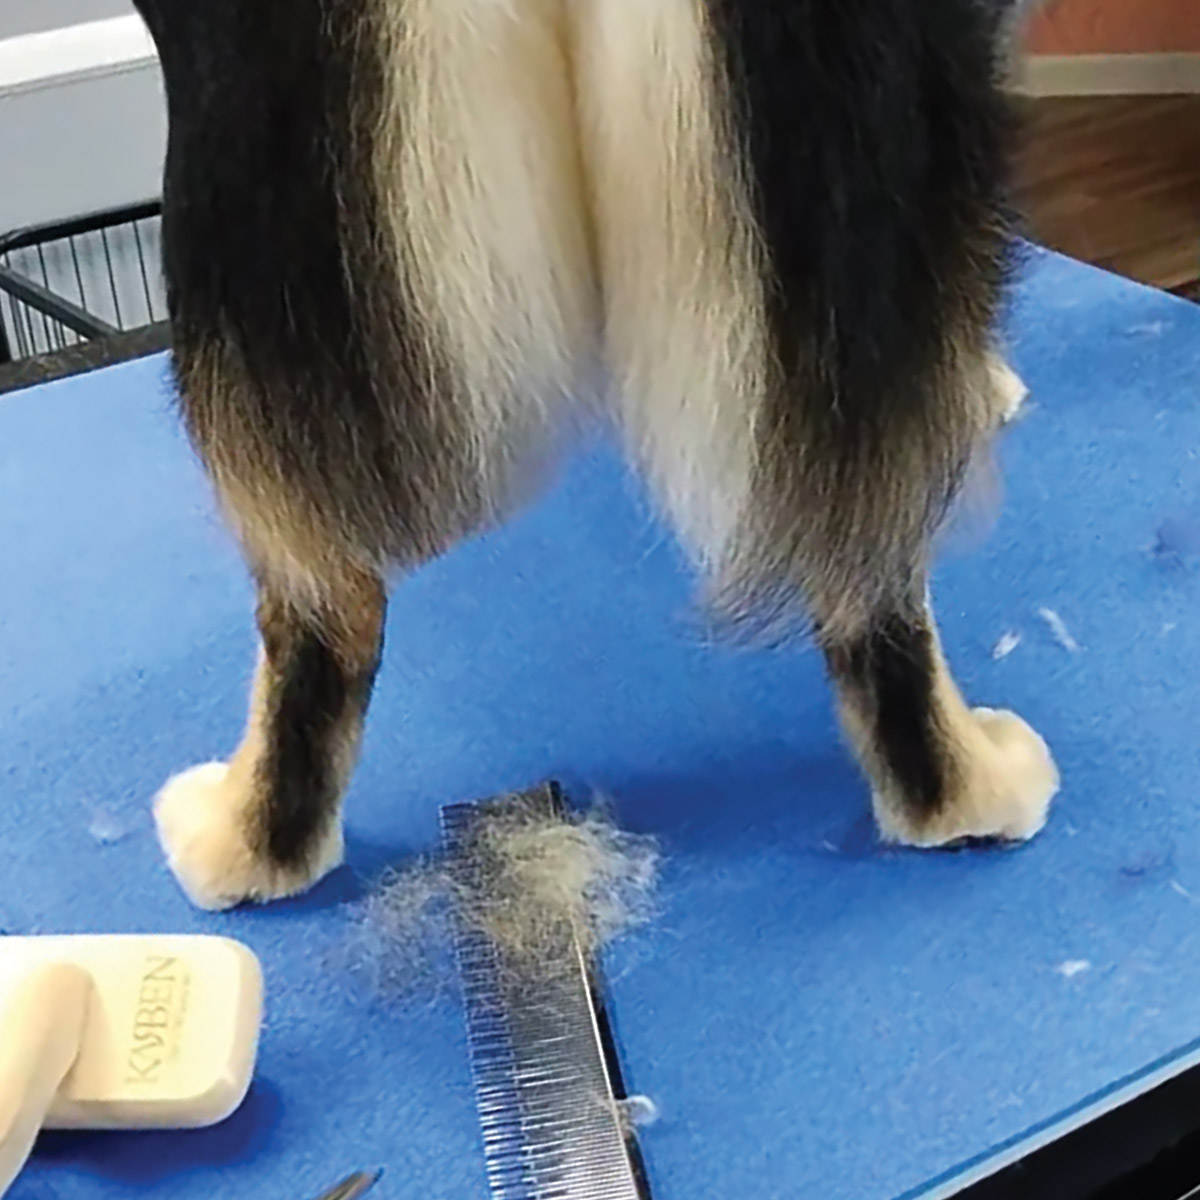 comparison between trimmed and untrimmed hind leg of dog